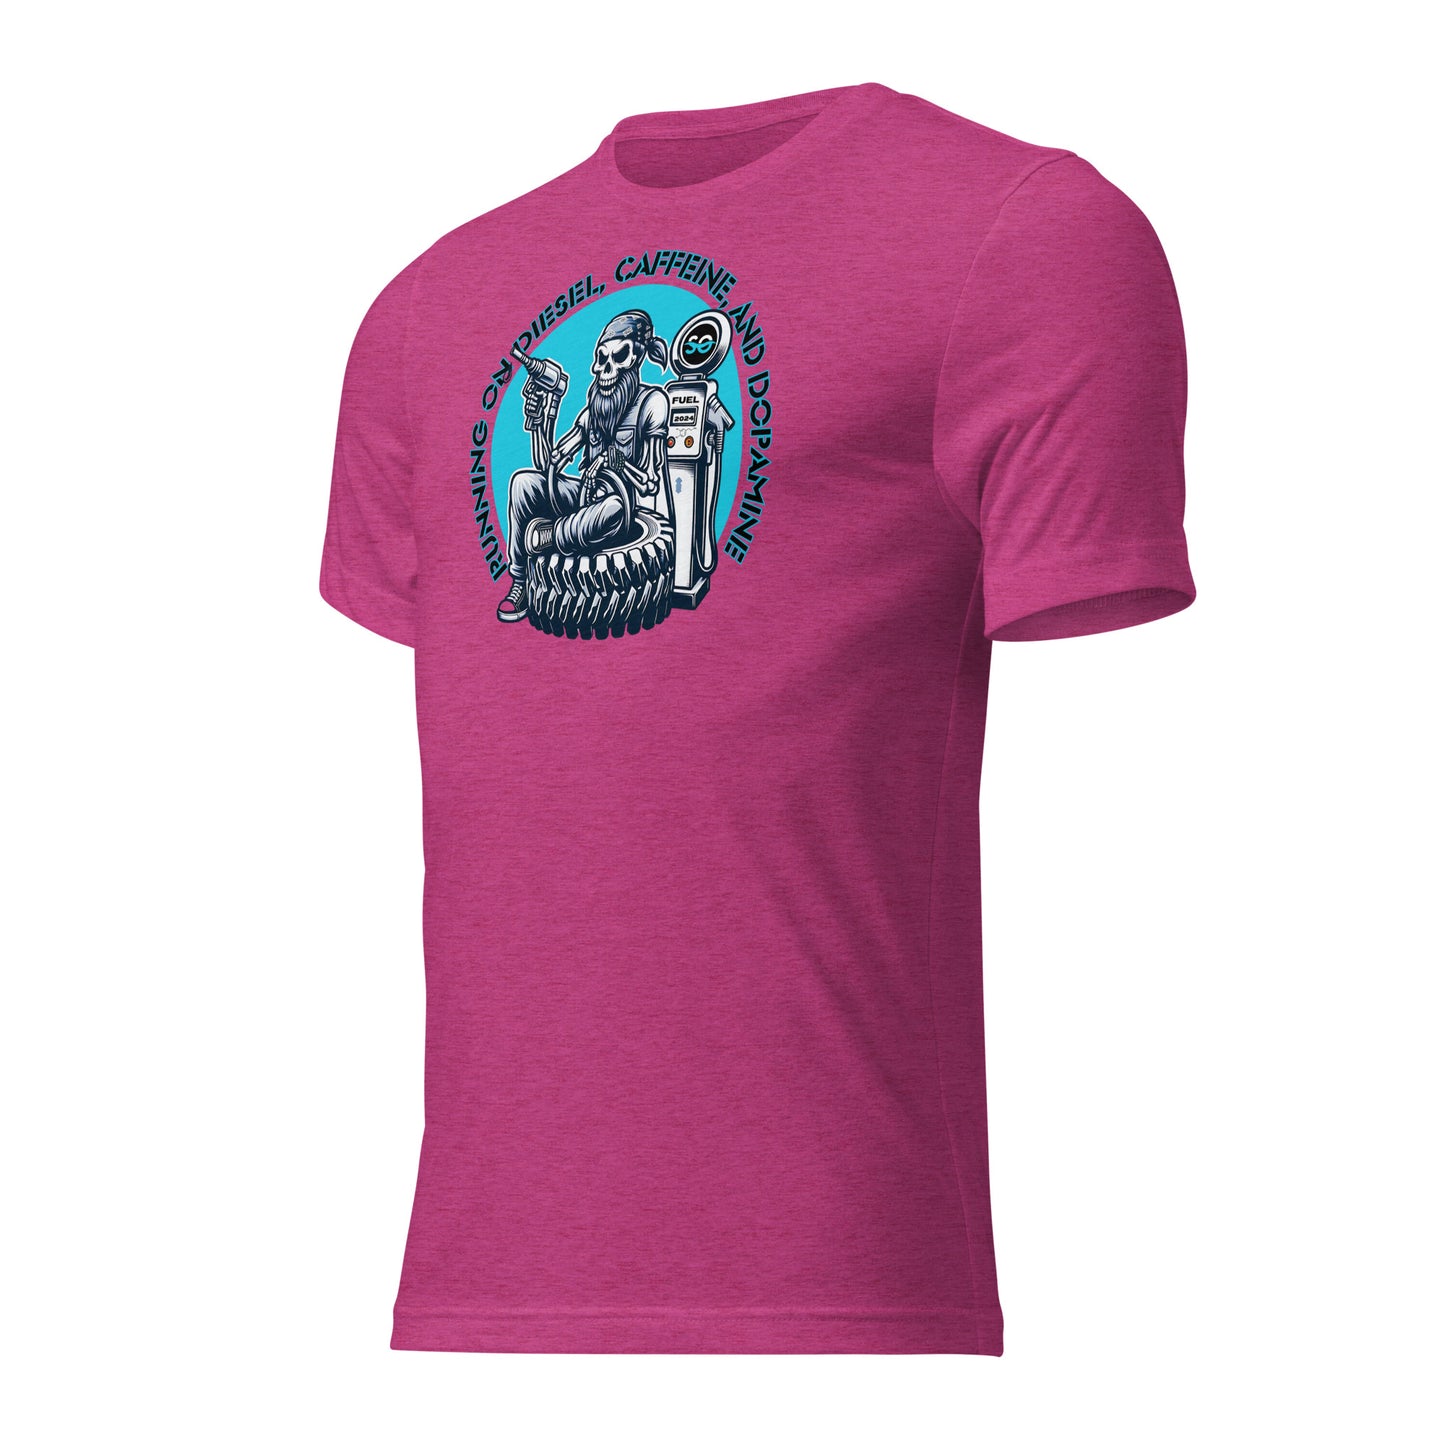 a pink t - shirt with an image of a skeleton riding a motorcycle